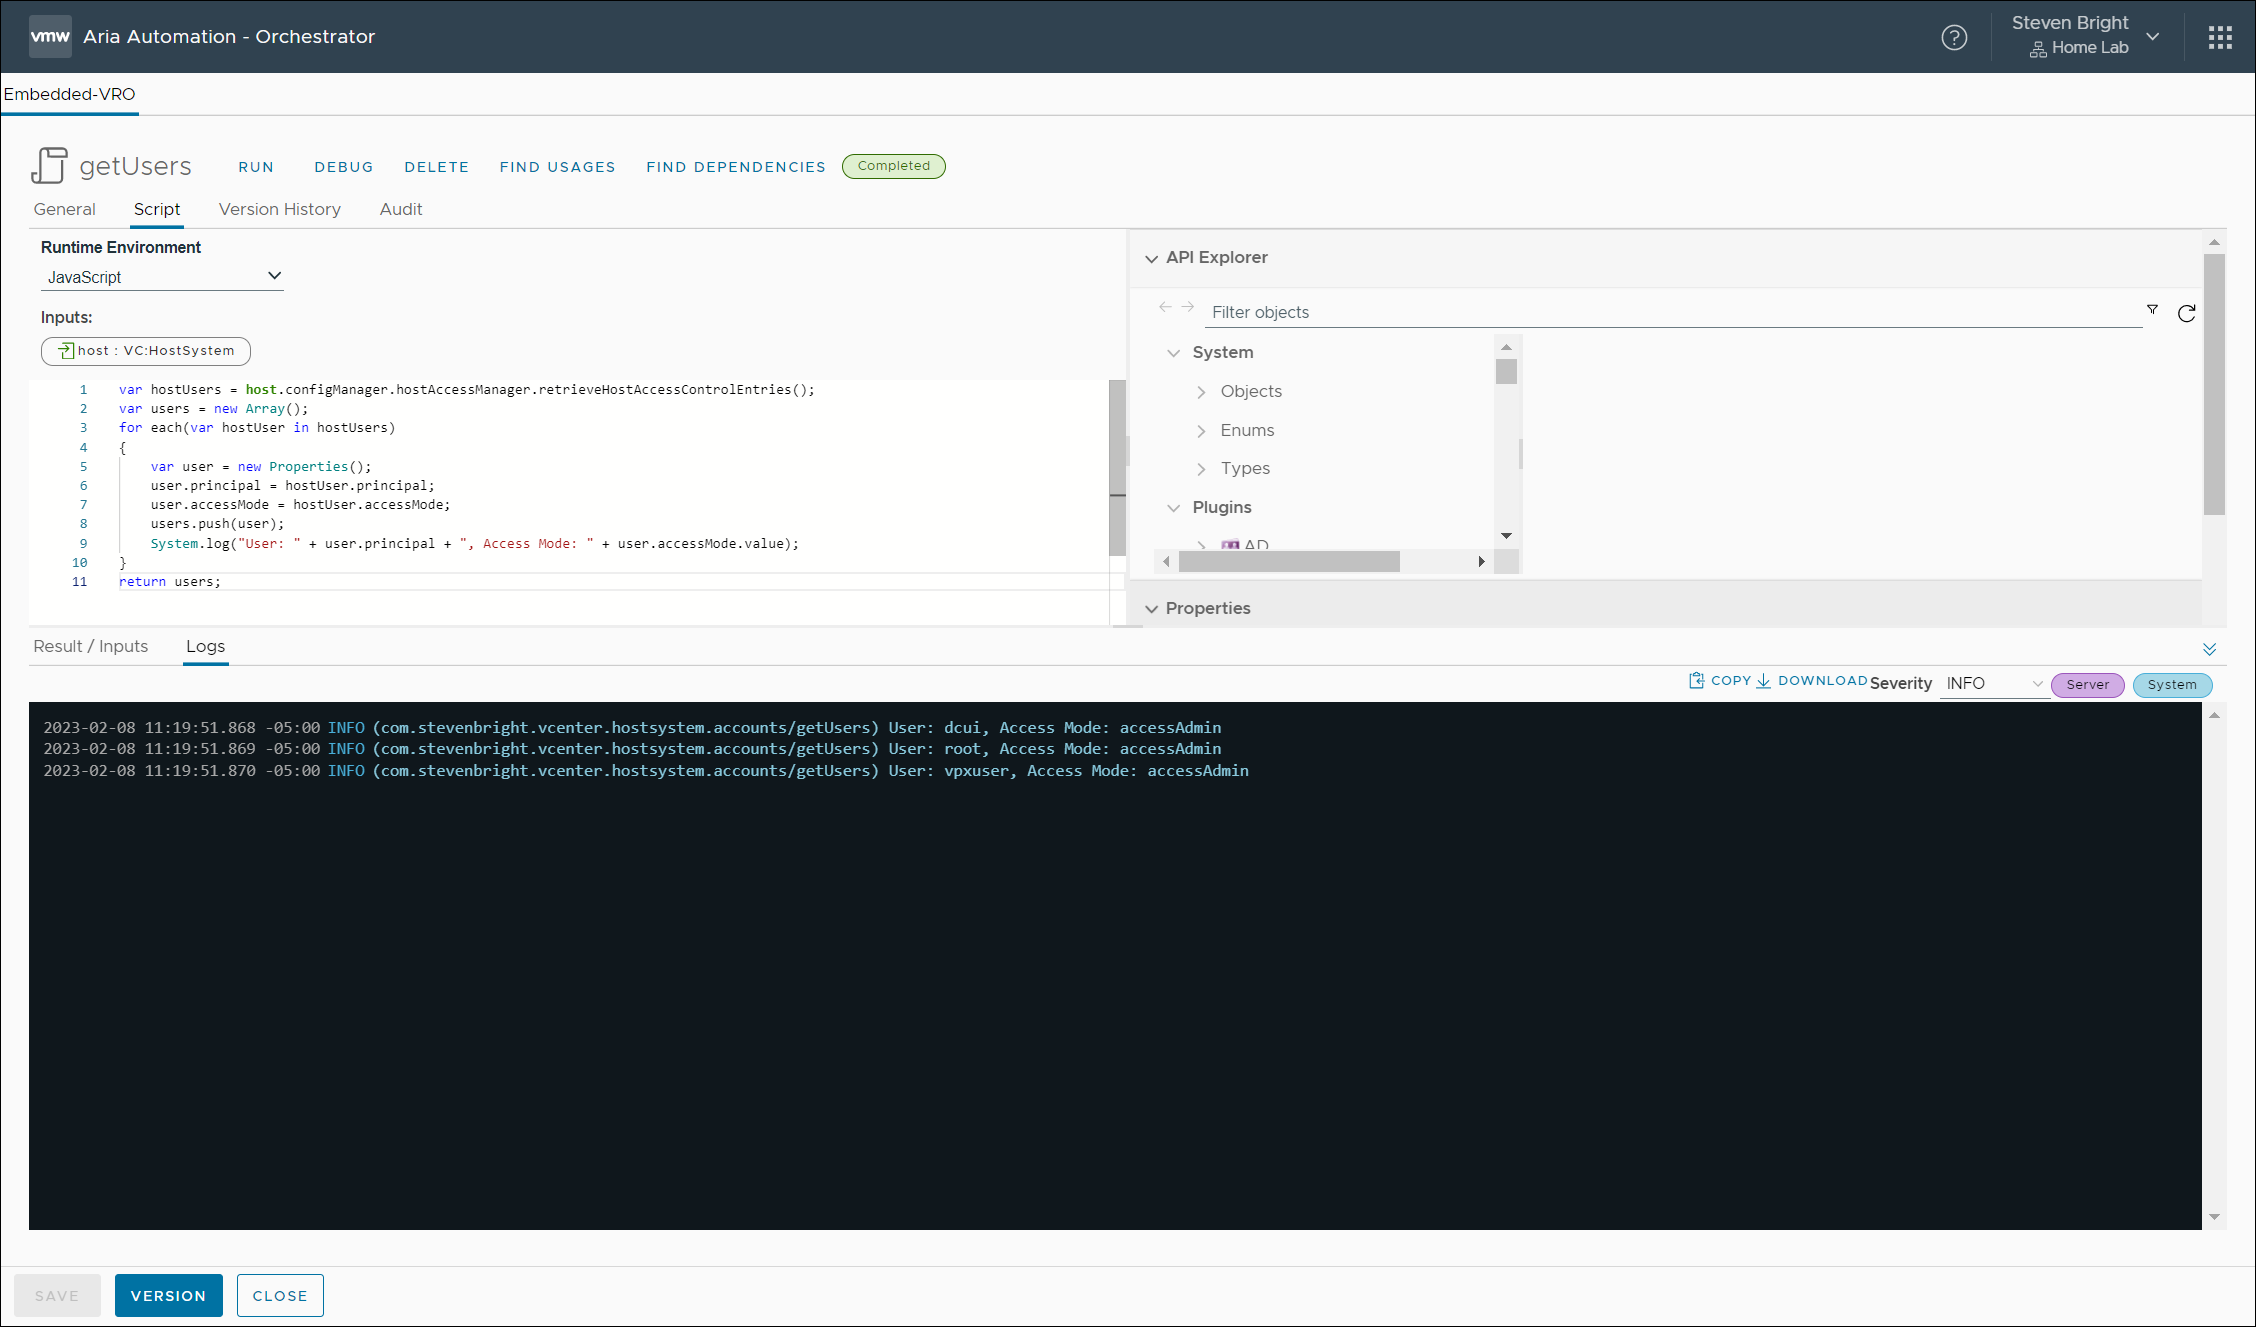 Screenshot of the VMware Aria Automation Orchestrator Action log listing VMware ESXi local user account objects